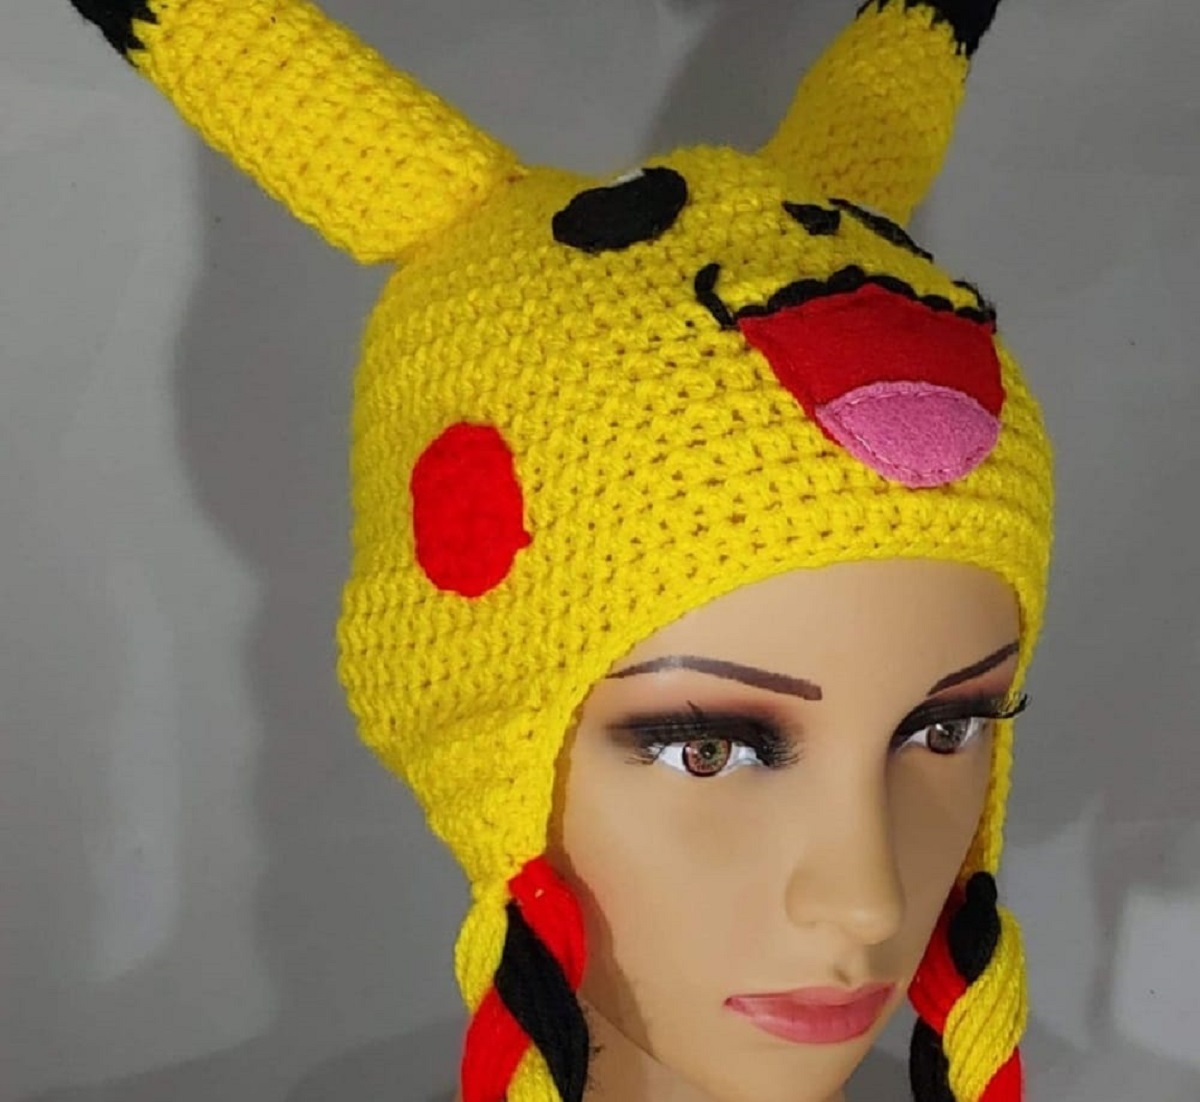 Mannequin head wearing a crochet Pikachu beanie with its tongue sticking out and braids coming down either side of the hat.